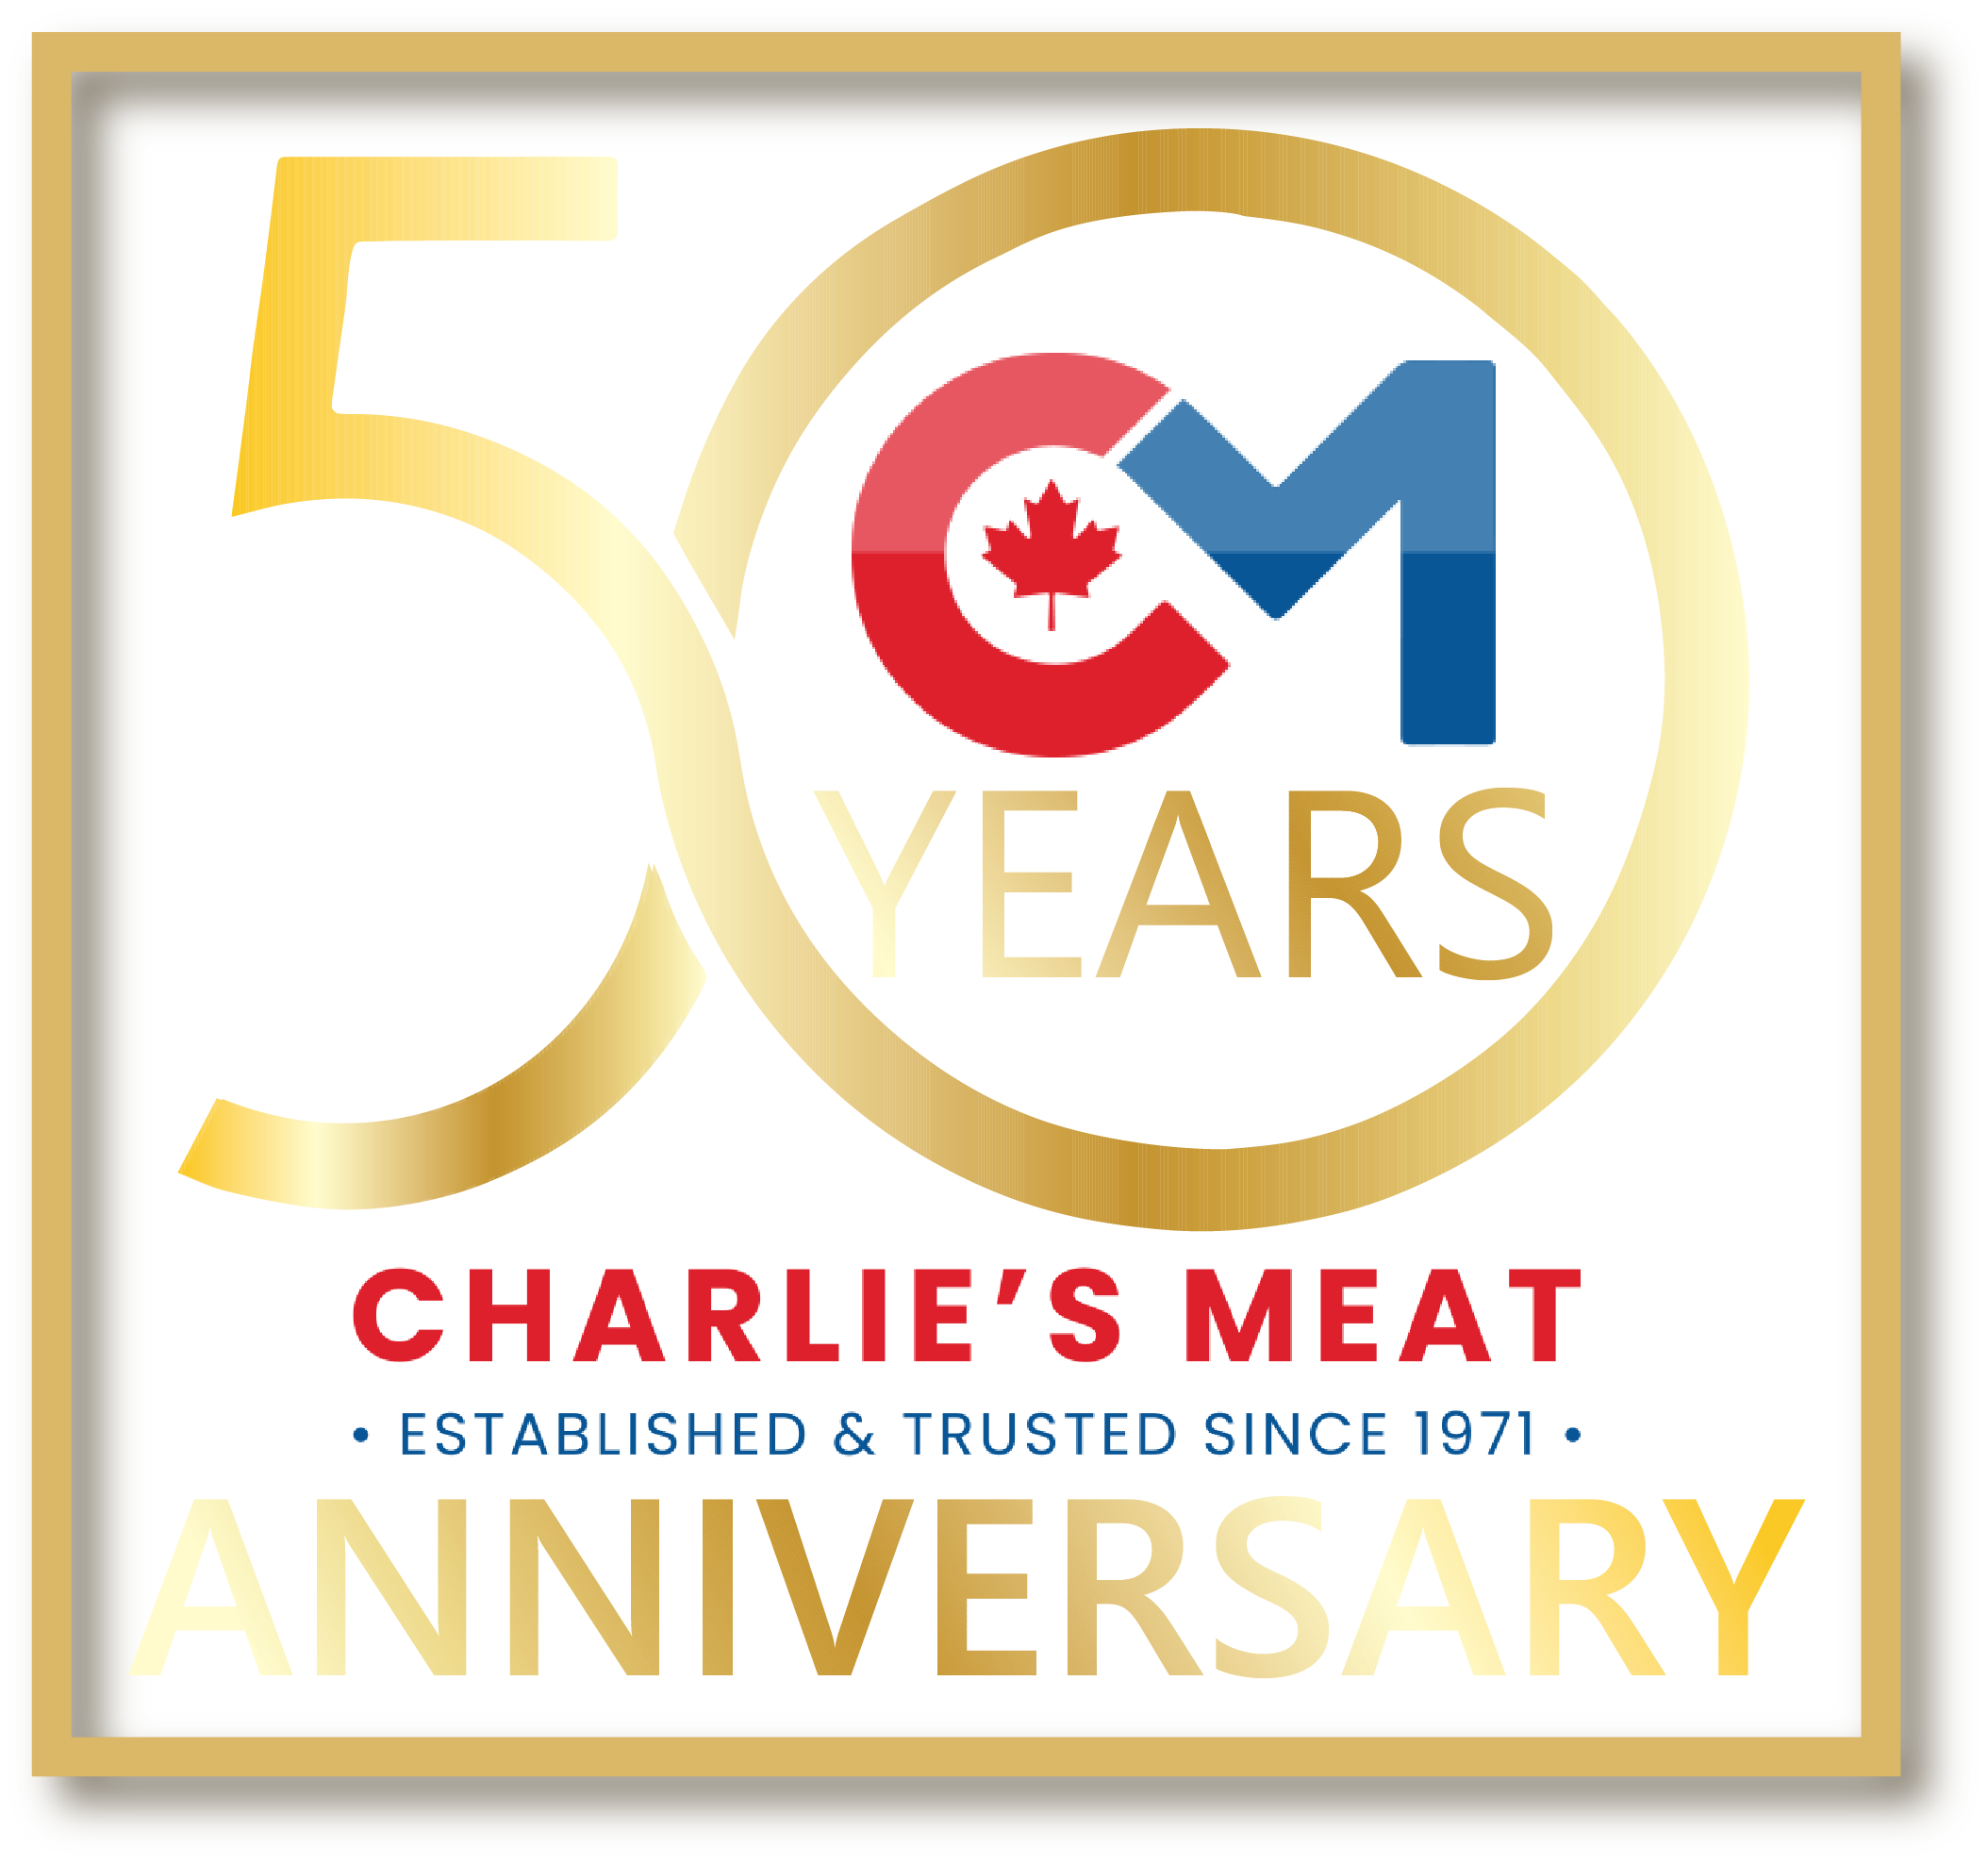 Charlie's Meat